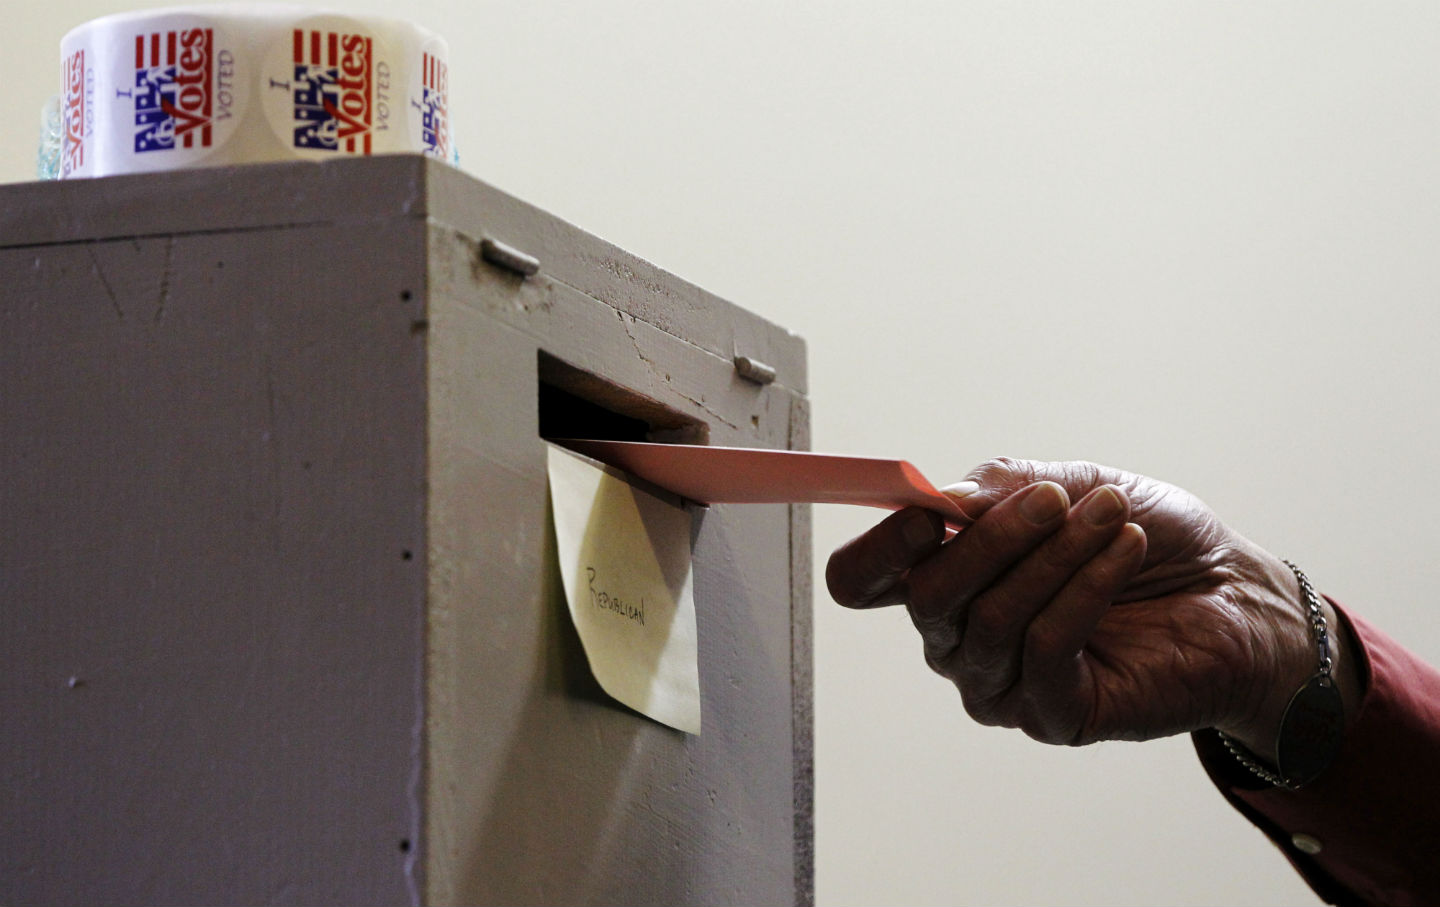 The Conservatives Who Gutted the Voting Rights Act Are Now Challenging ‘One Person, One Vote’